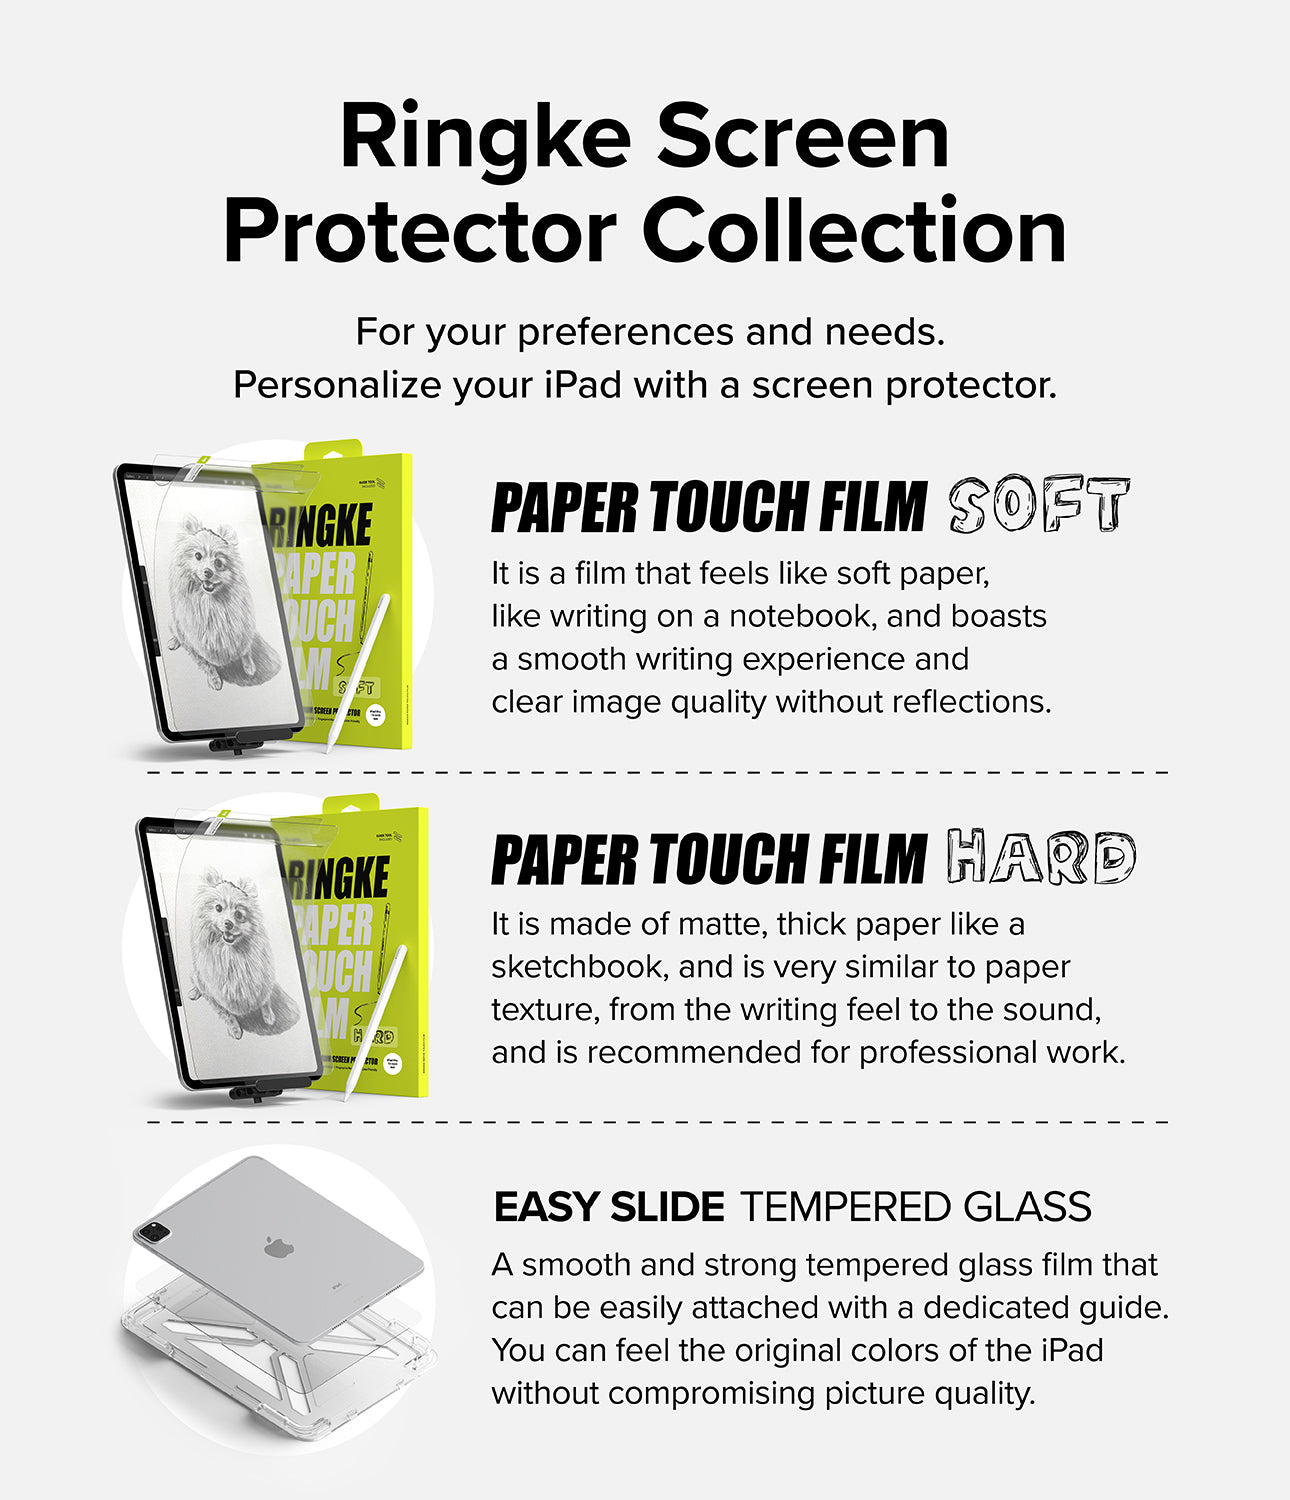 iPad Pro 13" (M4) Screen Protector | Paper Touch Film - Hard - Ringke Screen Protector Collection. For your preferences and needs. Personalize your iPad with a screen protector.